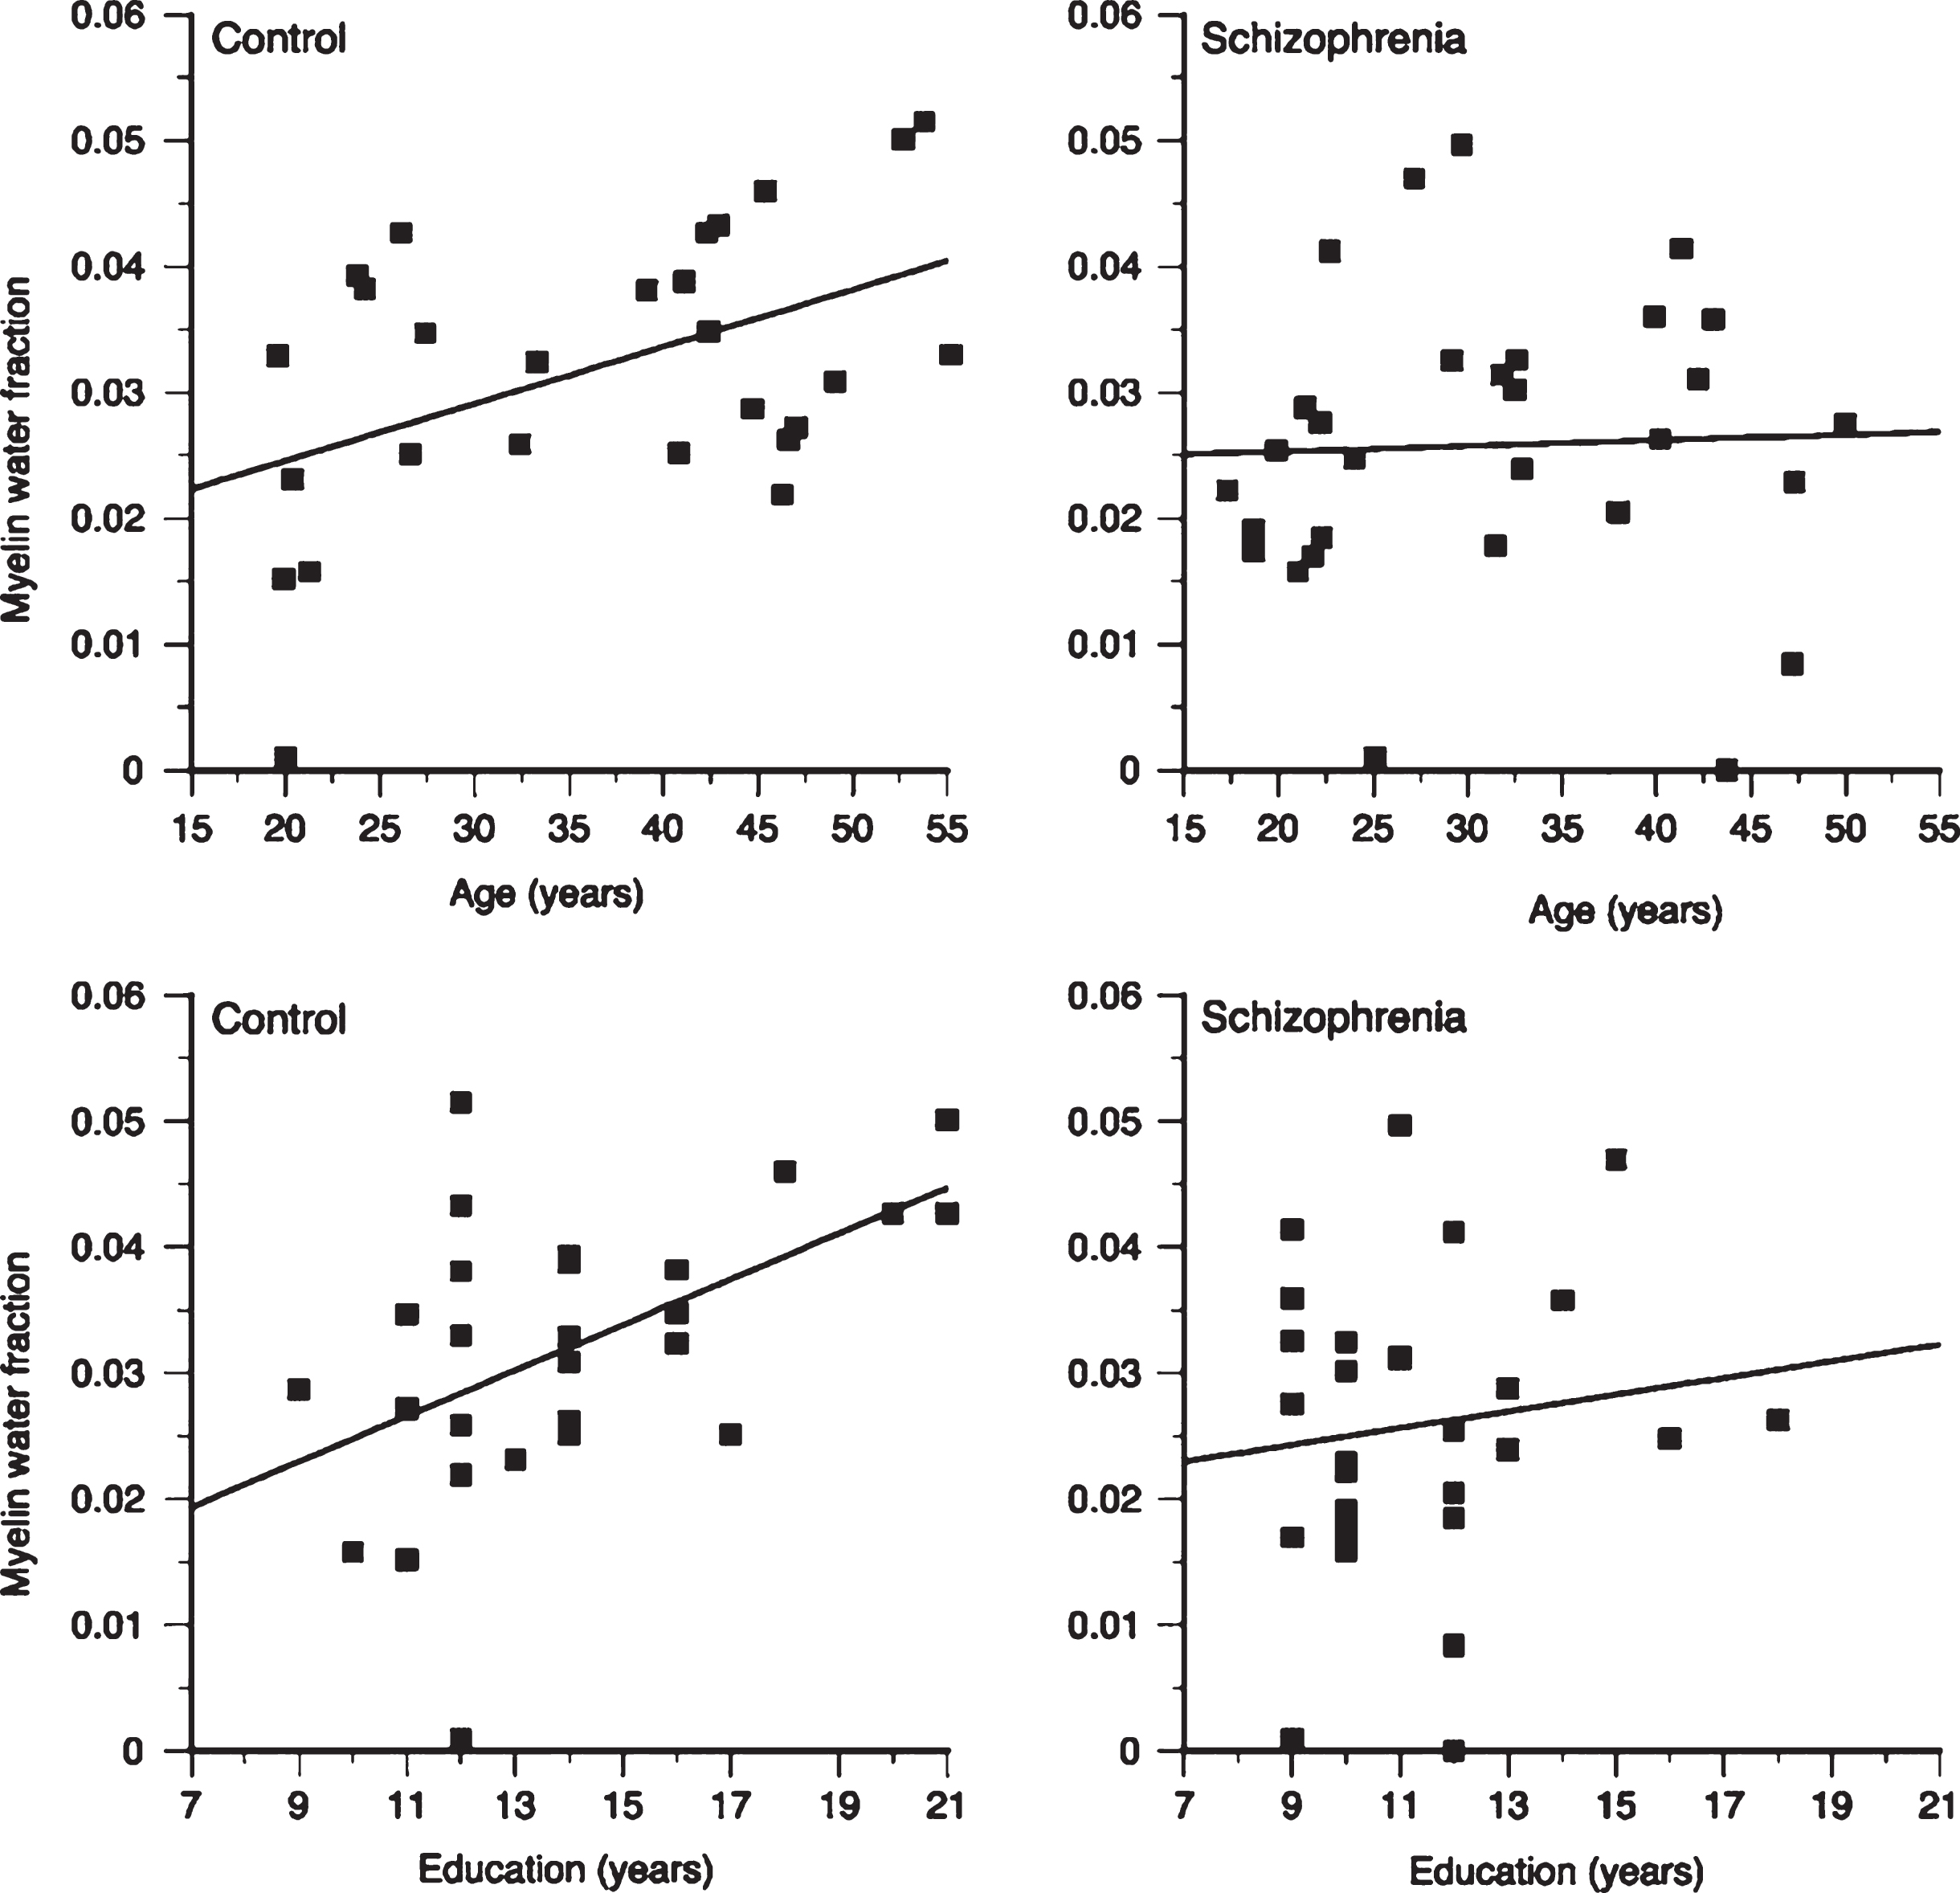 Plots of frontal myelin water fraction in 
relation to age and education in healthy comparison subjects (control) and patients with schizophrenia. While 
statistically significant relations between frontal myelin water fraction and both age (r = 0.47, p = 0.01) and education (r = 0.51, p = 0.006) were observed in healthy subjects, no 
statistically significant relations were seen in patients with schizophrenia (Fig. 4, Flynn SW, Lang DJ, Mackay 
AL, Goghari V, Vavasour IM, Whittall KP, et al. Abnormalities of myelination in schizophrenia detected in 
vivo with MRI, and post-mortem with analysis of oligodendrocyte proteins. Mol Psychiatry. 2003;8(9):811-20).